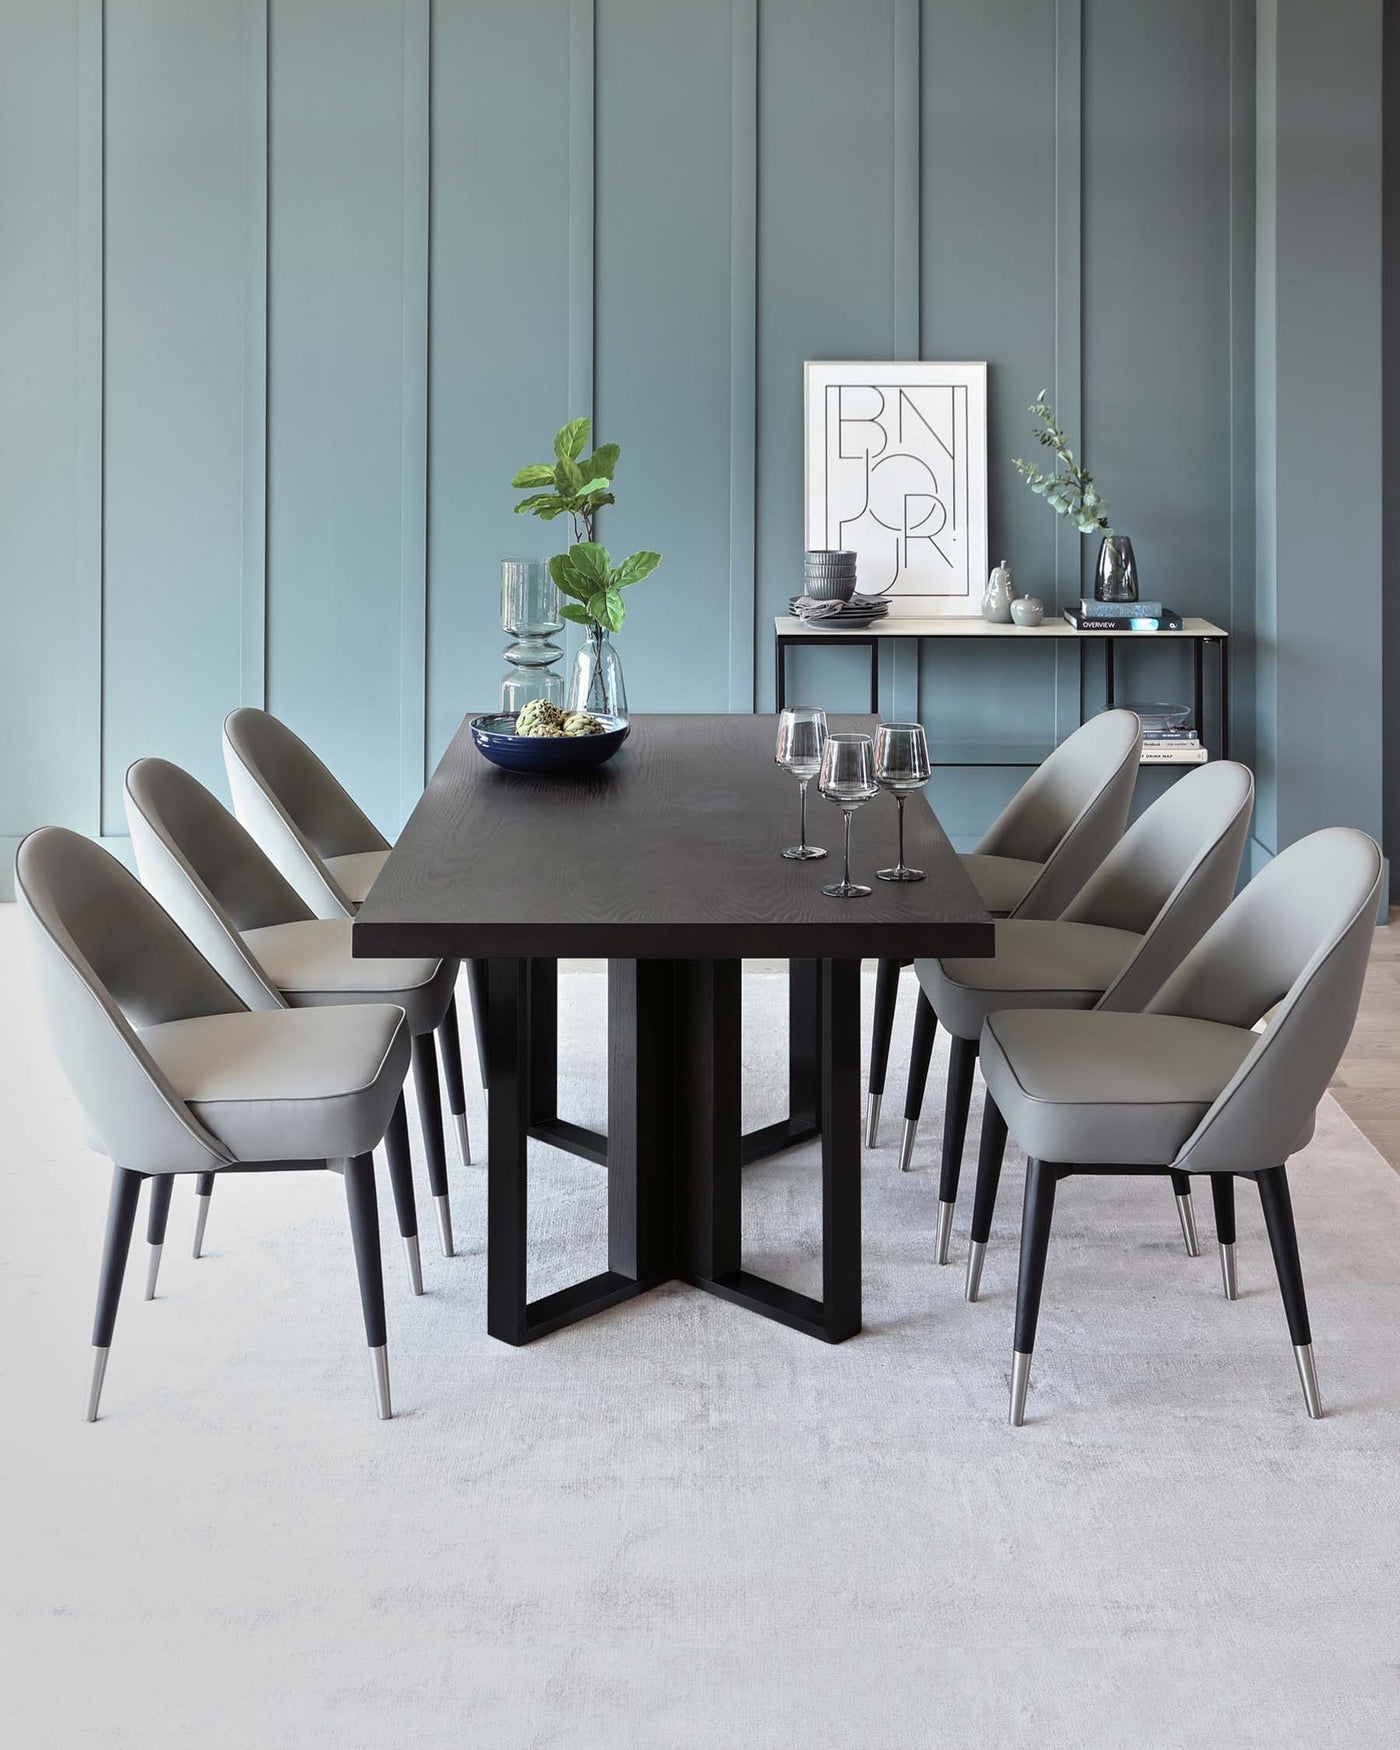 Modern dining room featuring a large rectangular dark wood table with robust, block-style legs, surrounded by eight elegant light grey upholstered dining chairs with slender metal legs. A sideboard with decor accents is placed against a panelled wall in the background.